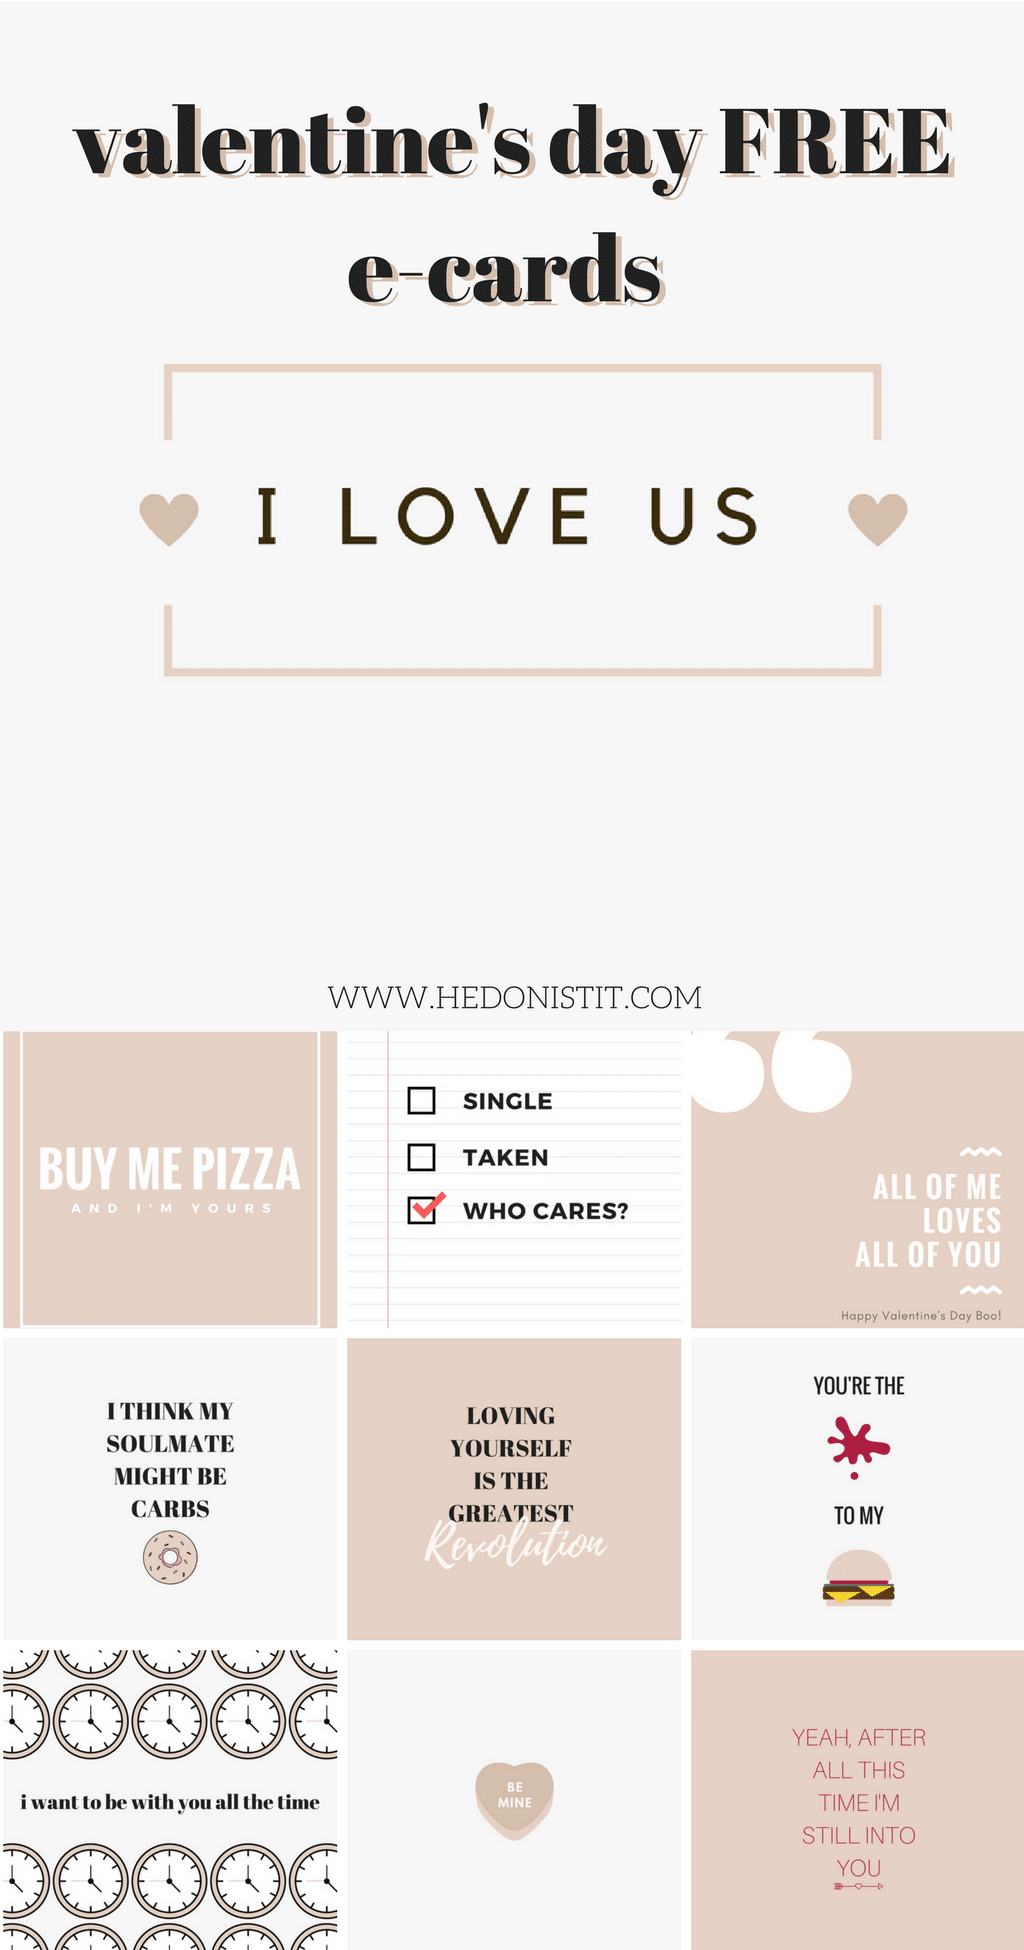 Valentine's Day Free Printable Cards - Tell your special someone that you love them today! hedonistit.com